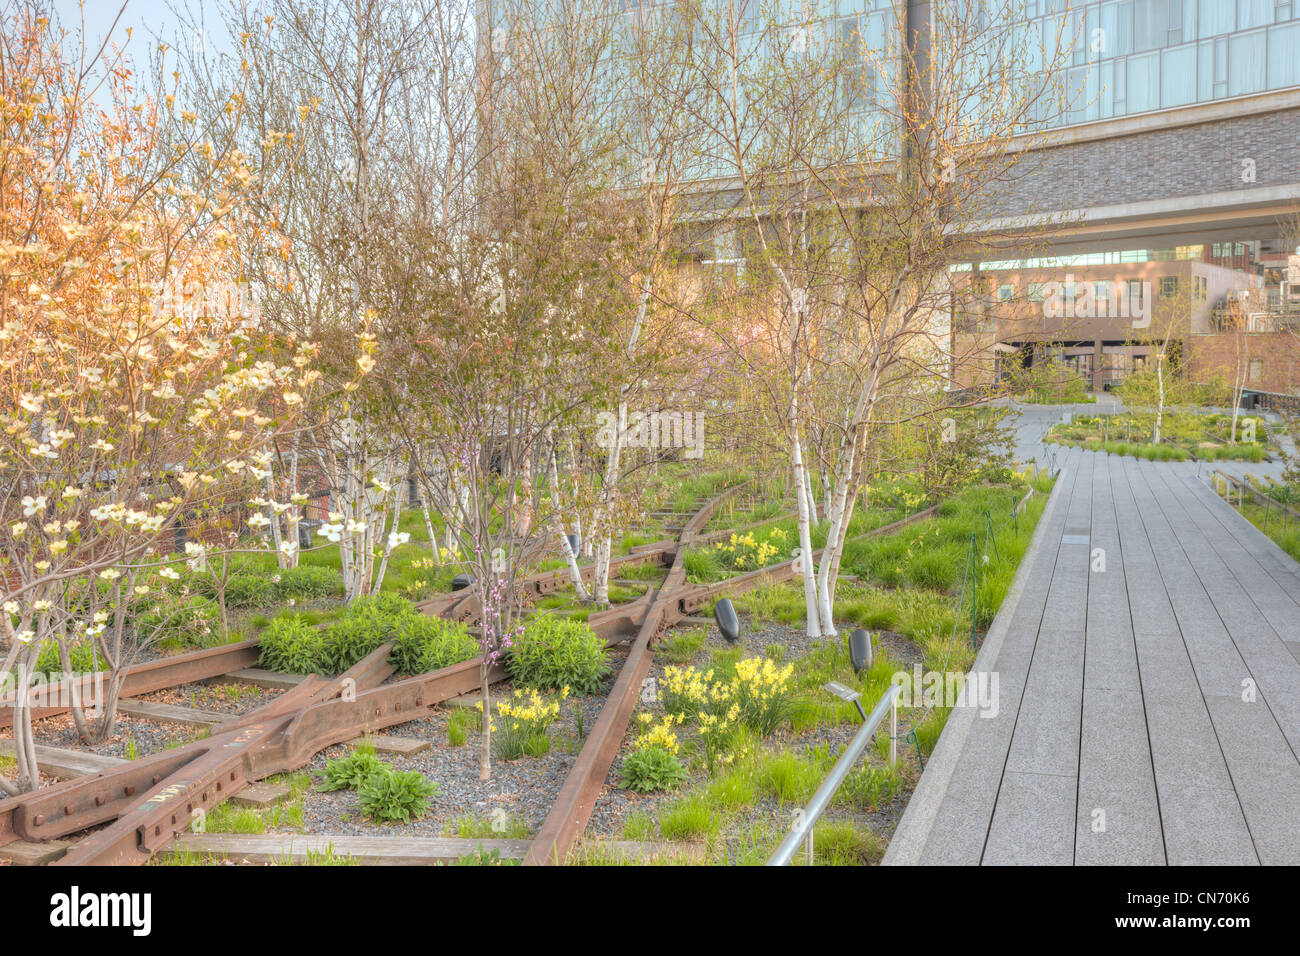 A view of the landscaping in High Line Park, planted along the old railroad tracks left in place, in New York City. Stock Photo